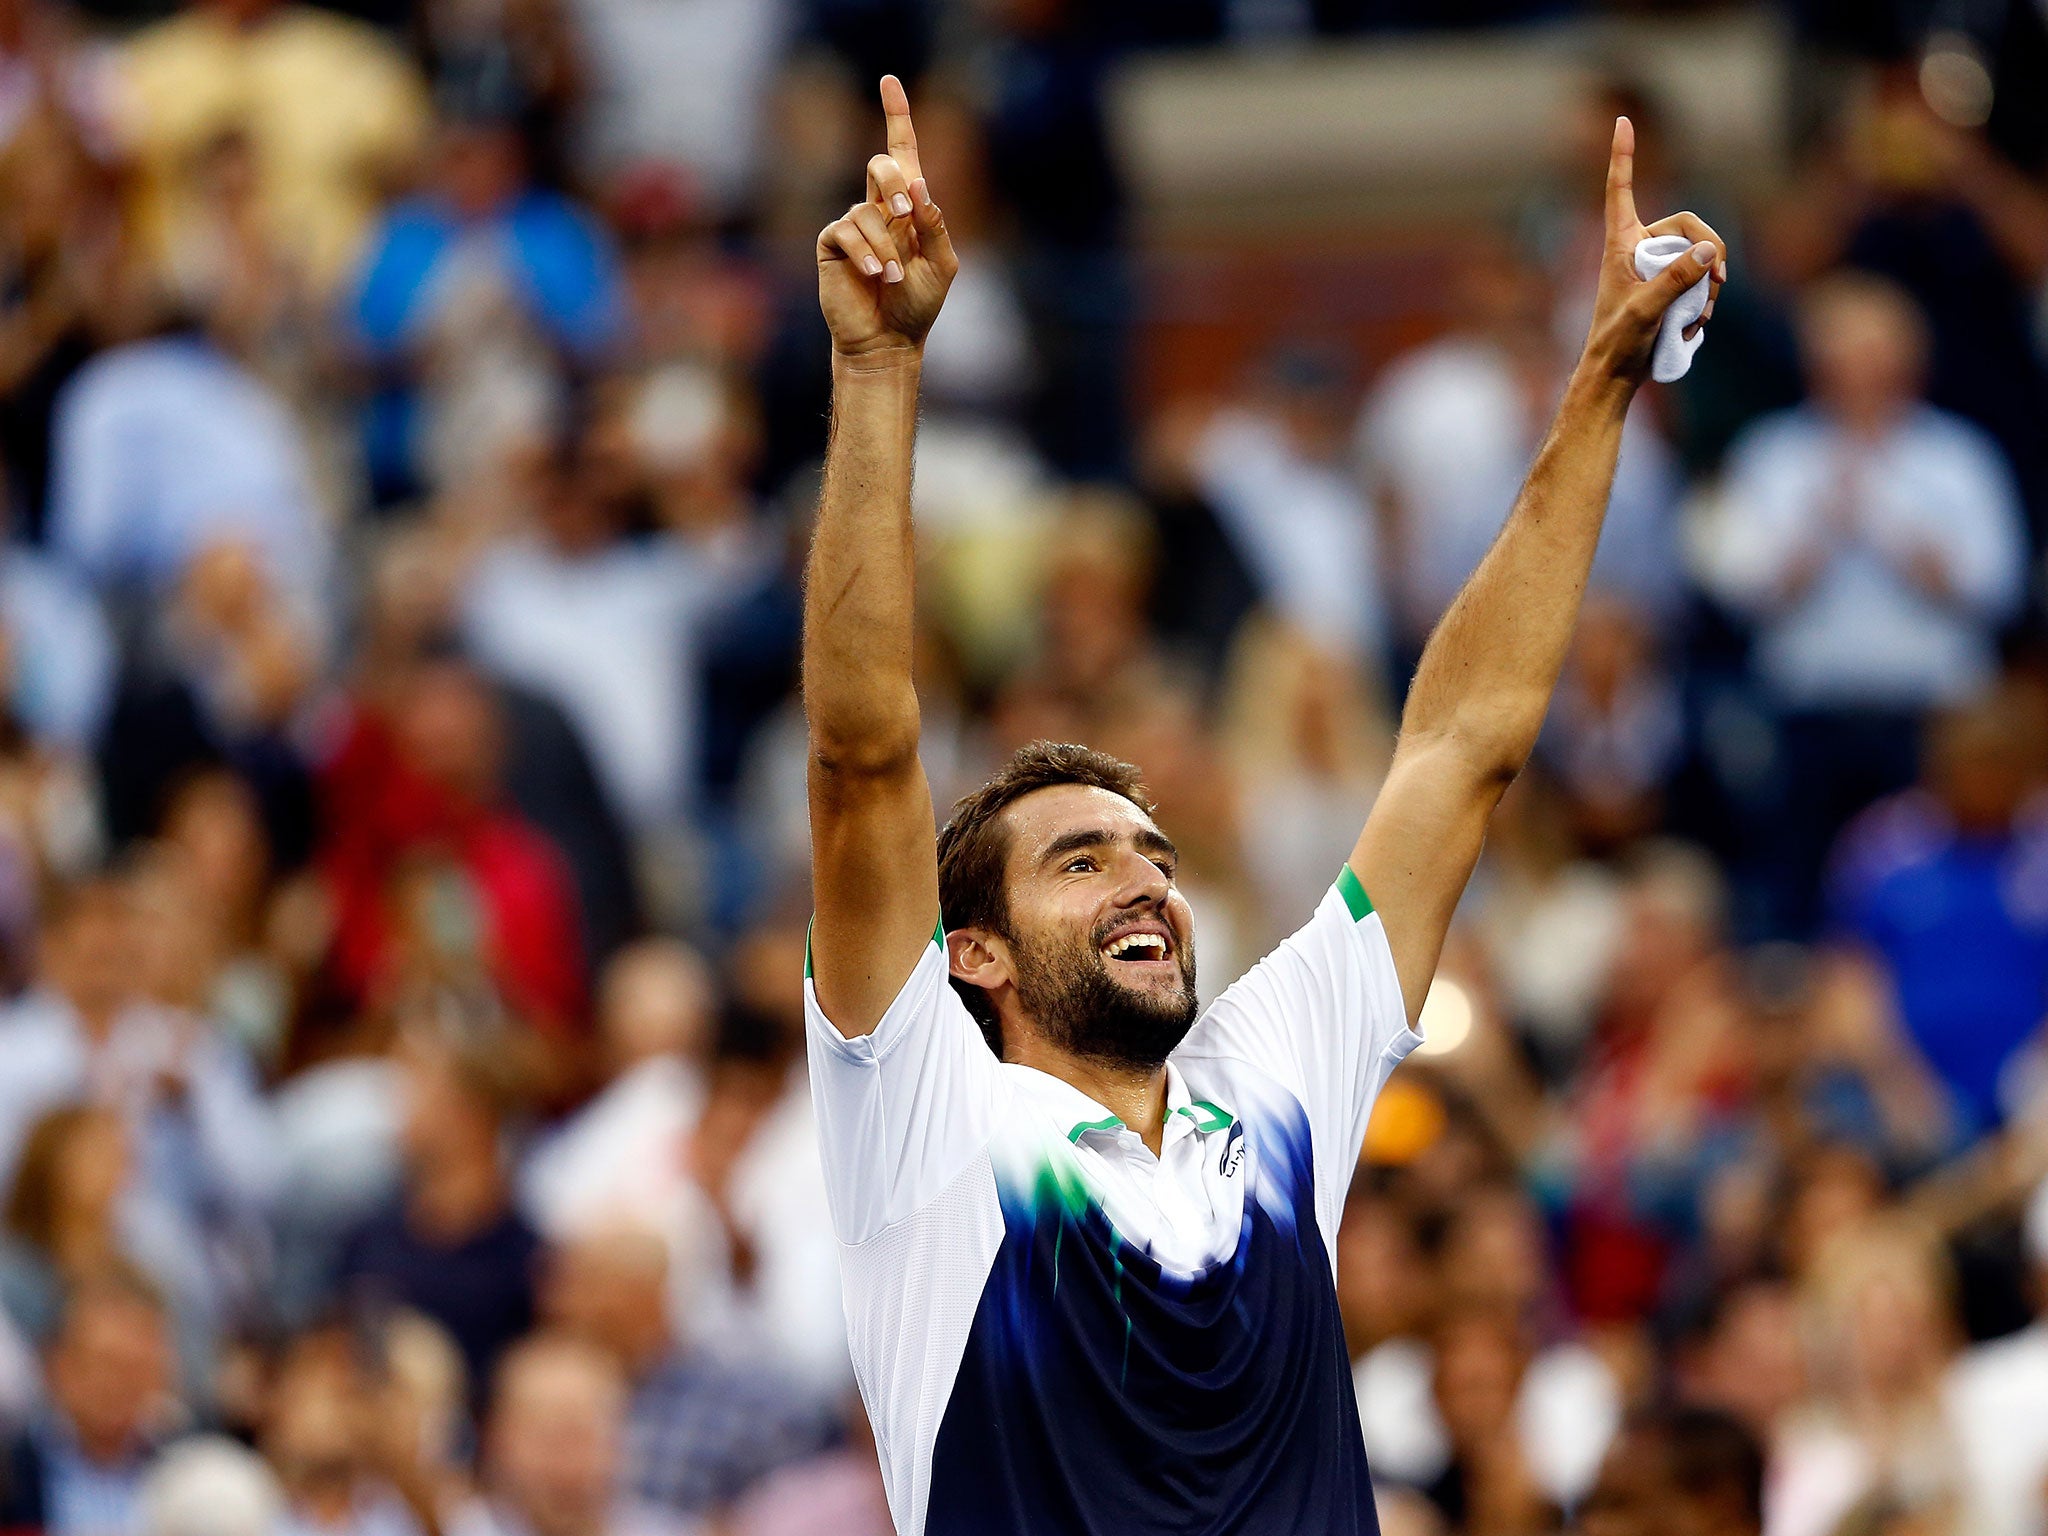 Marin Cilic of Croatia reacts after defeating Kei Nishikori of Japan to win the men's singles final match of the 2014 US Open